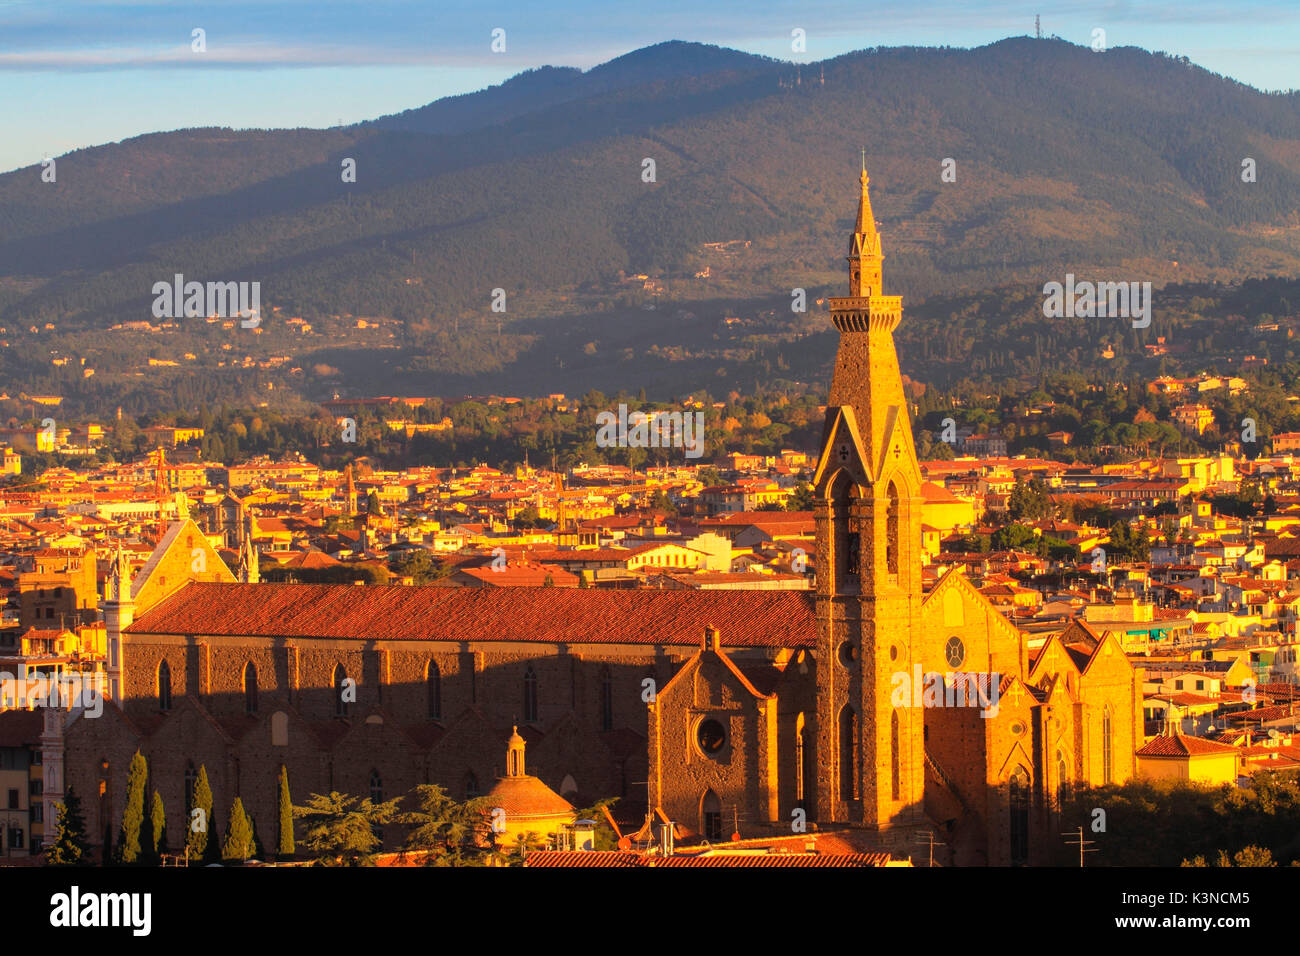 Europe, Italy, Tuscany. The basilica of San Lorenzo in the Old Town of Florence - city of art of Tuscany Stock Photo